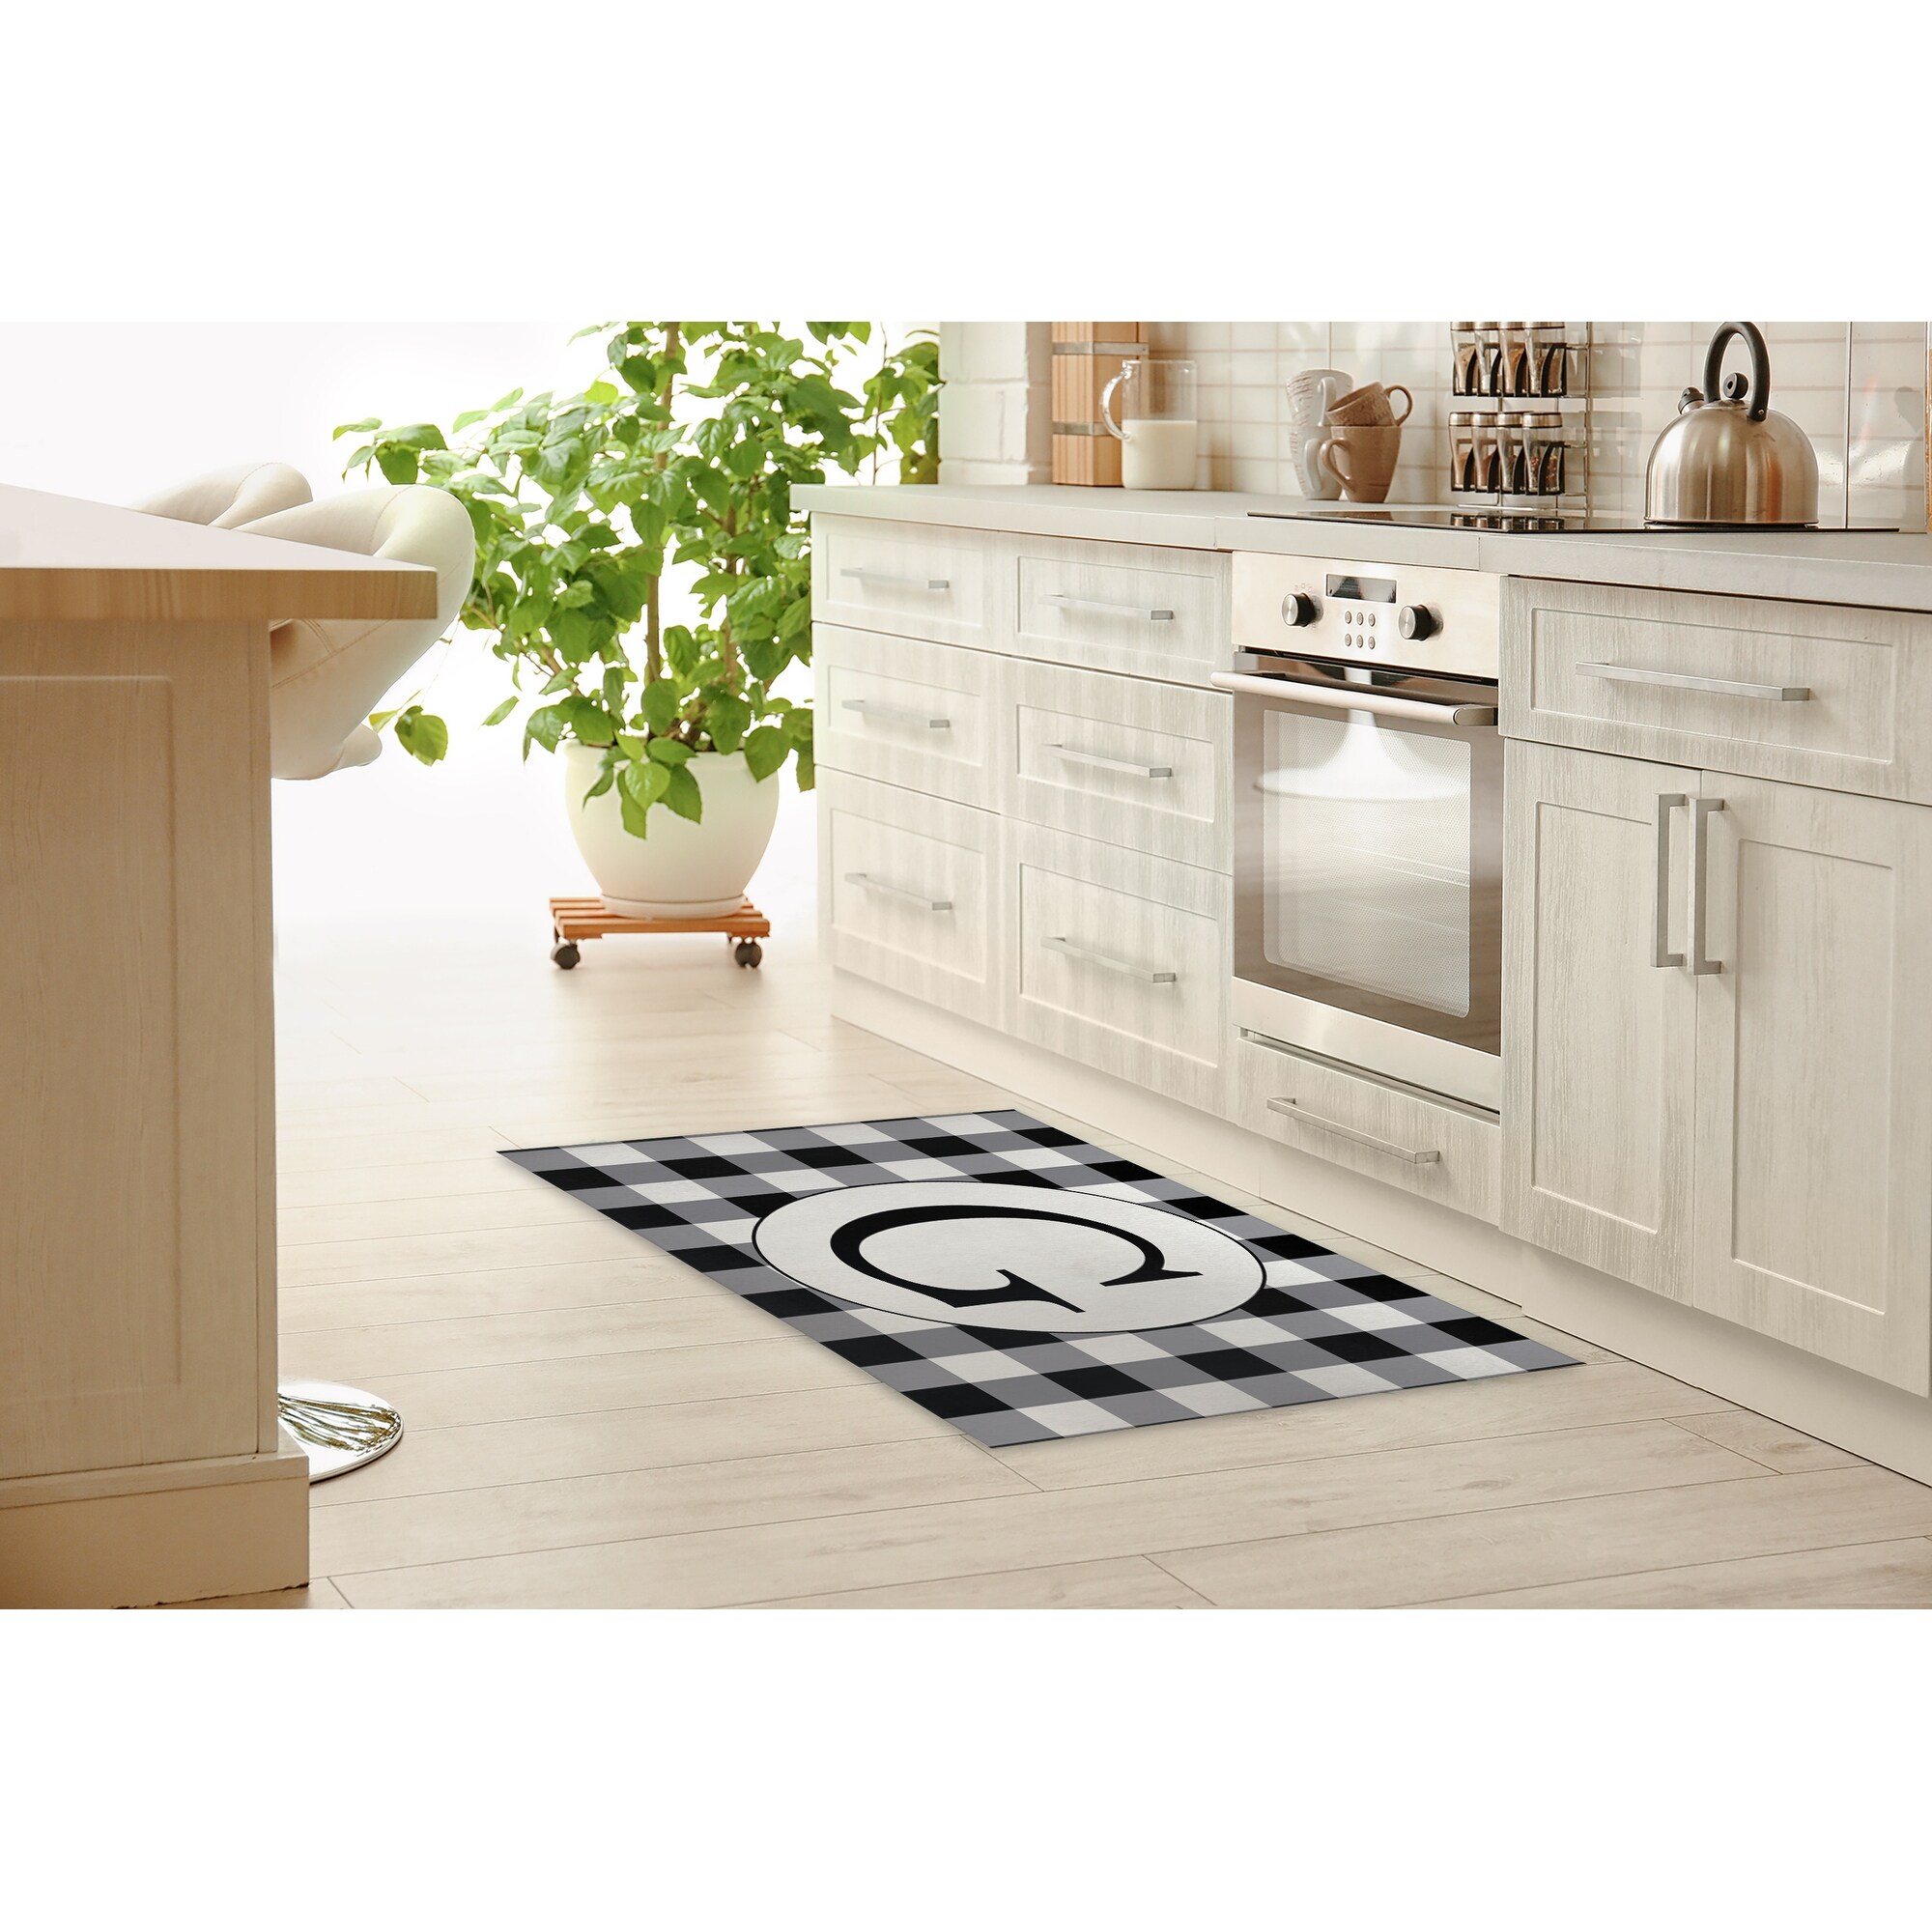 https://ak1.ostkcdn.com/images/products/is/images/direct/d9ce29d3e2abdf71547620c5f340be27f4a45427/MONO-BLACK-%26-WHITE-G-Kitchen-Mat-By-Kavka-Designs.jpg